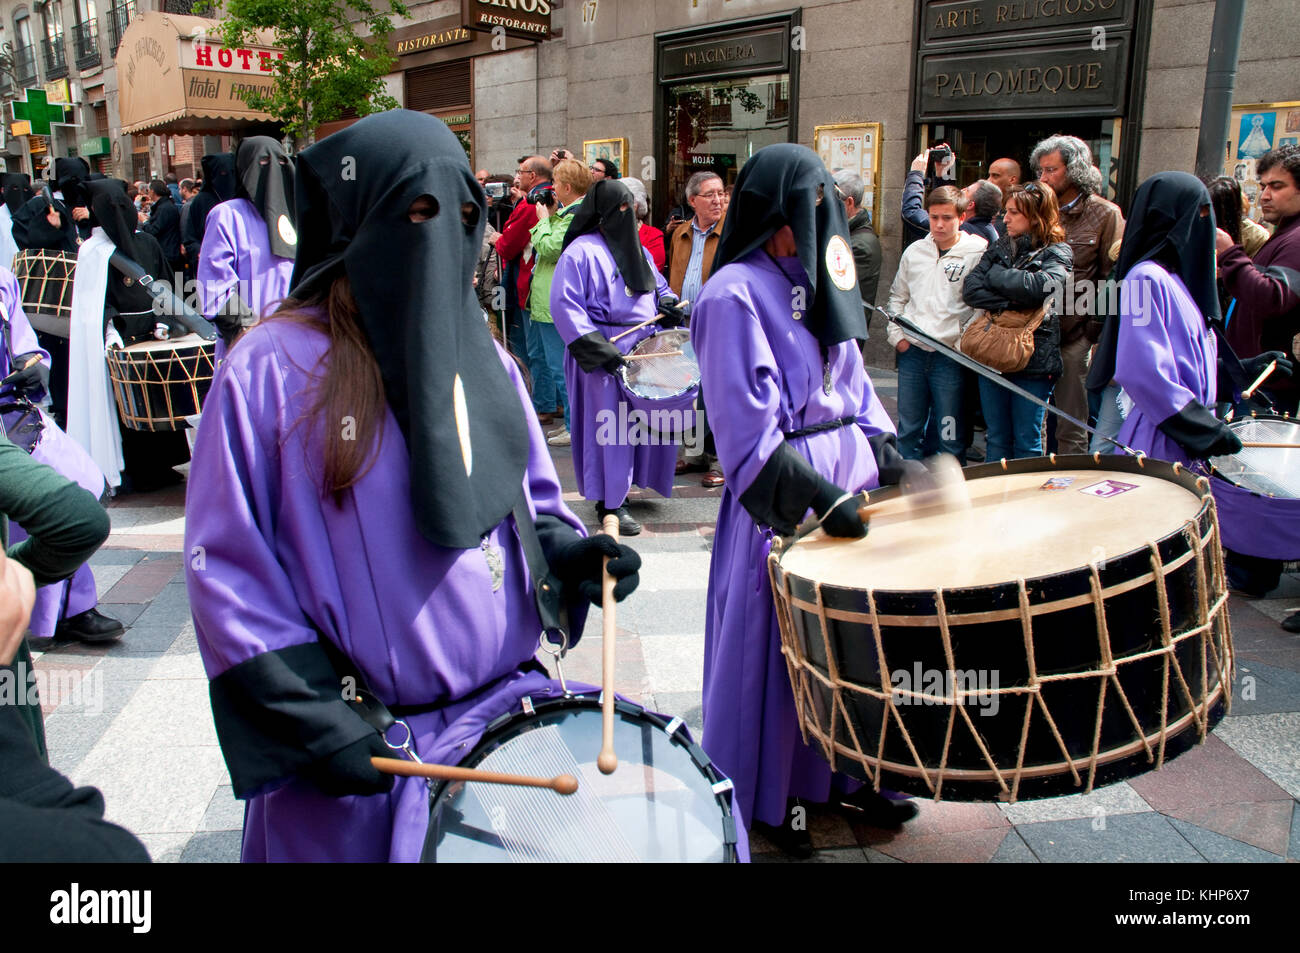 Drumming during a Holy Week procession. Madrid, Spain. Stock Photo